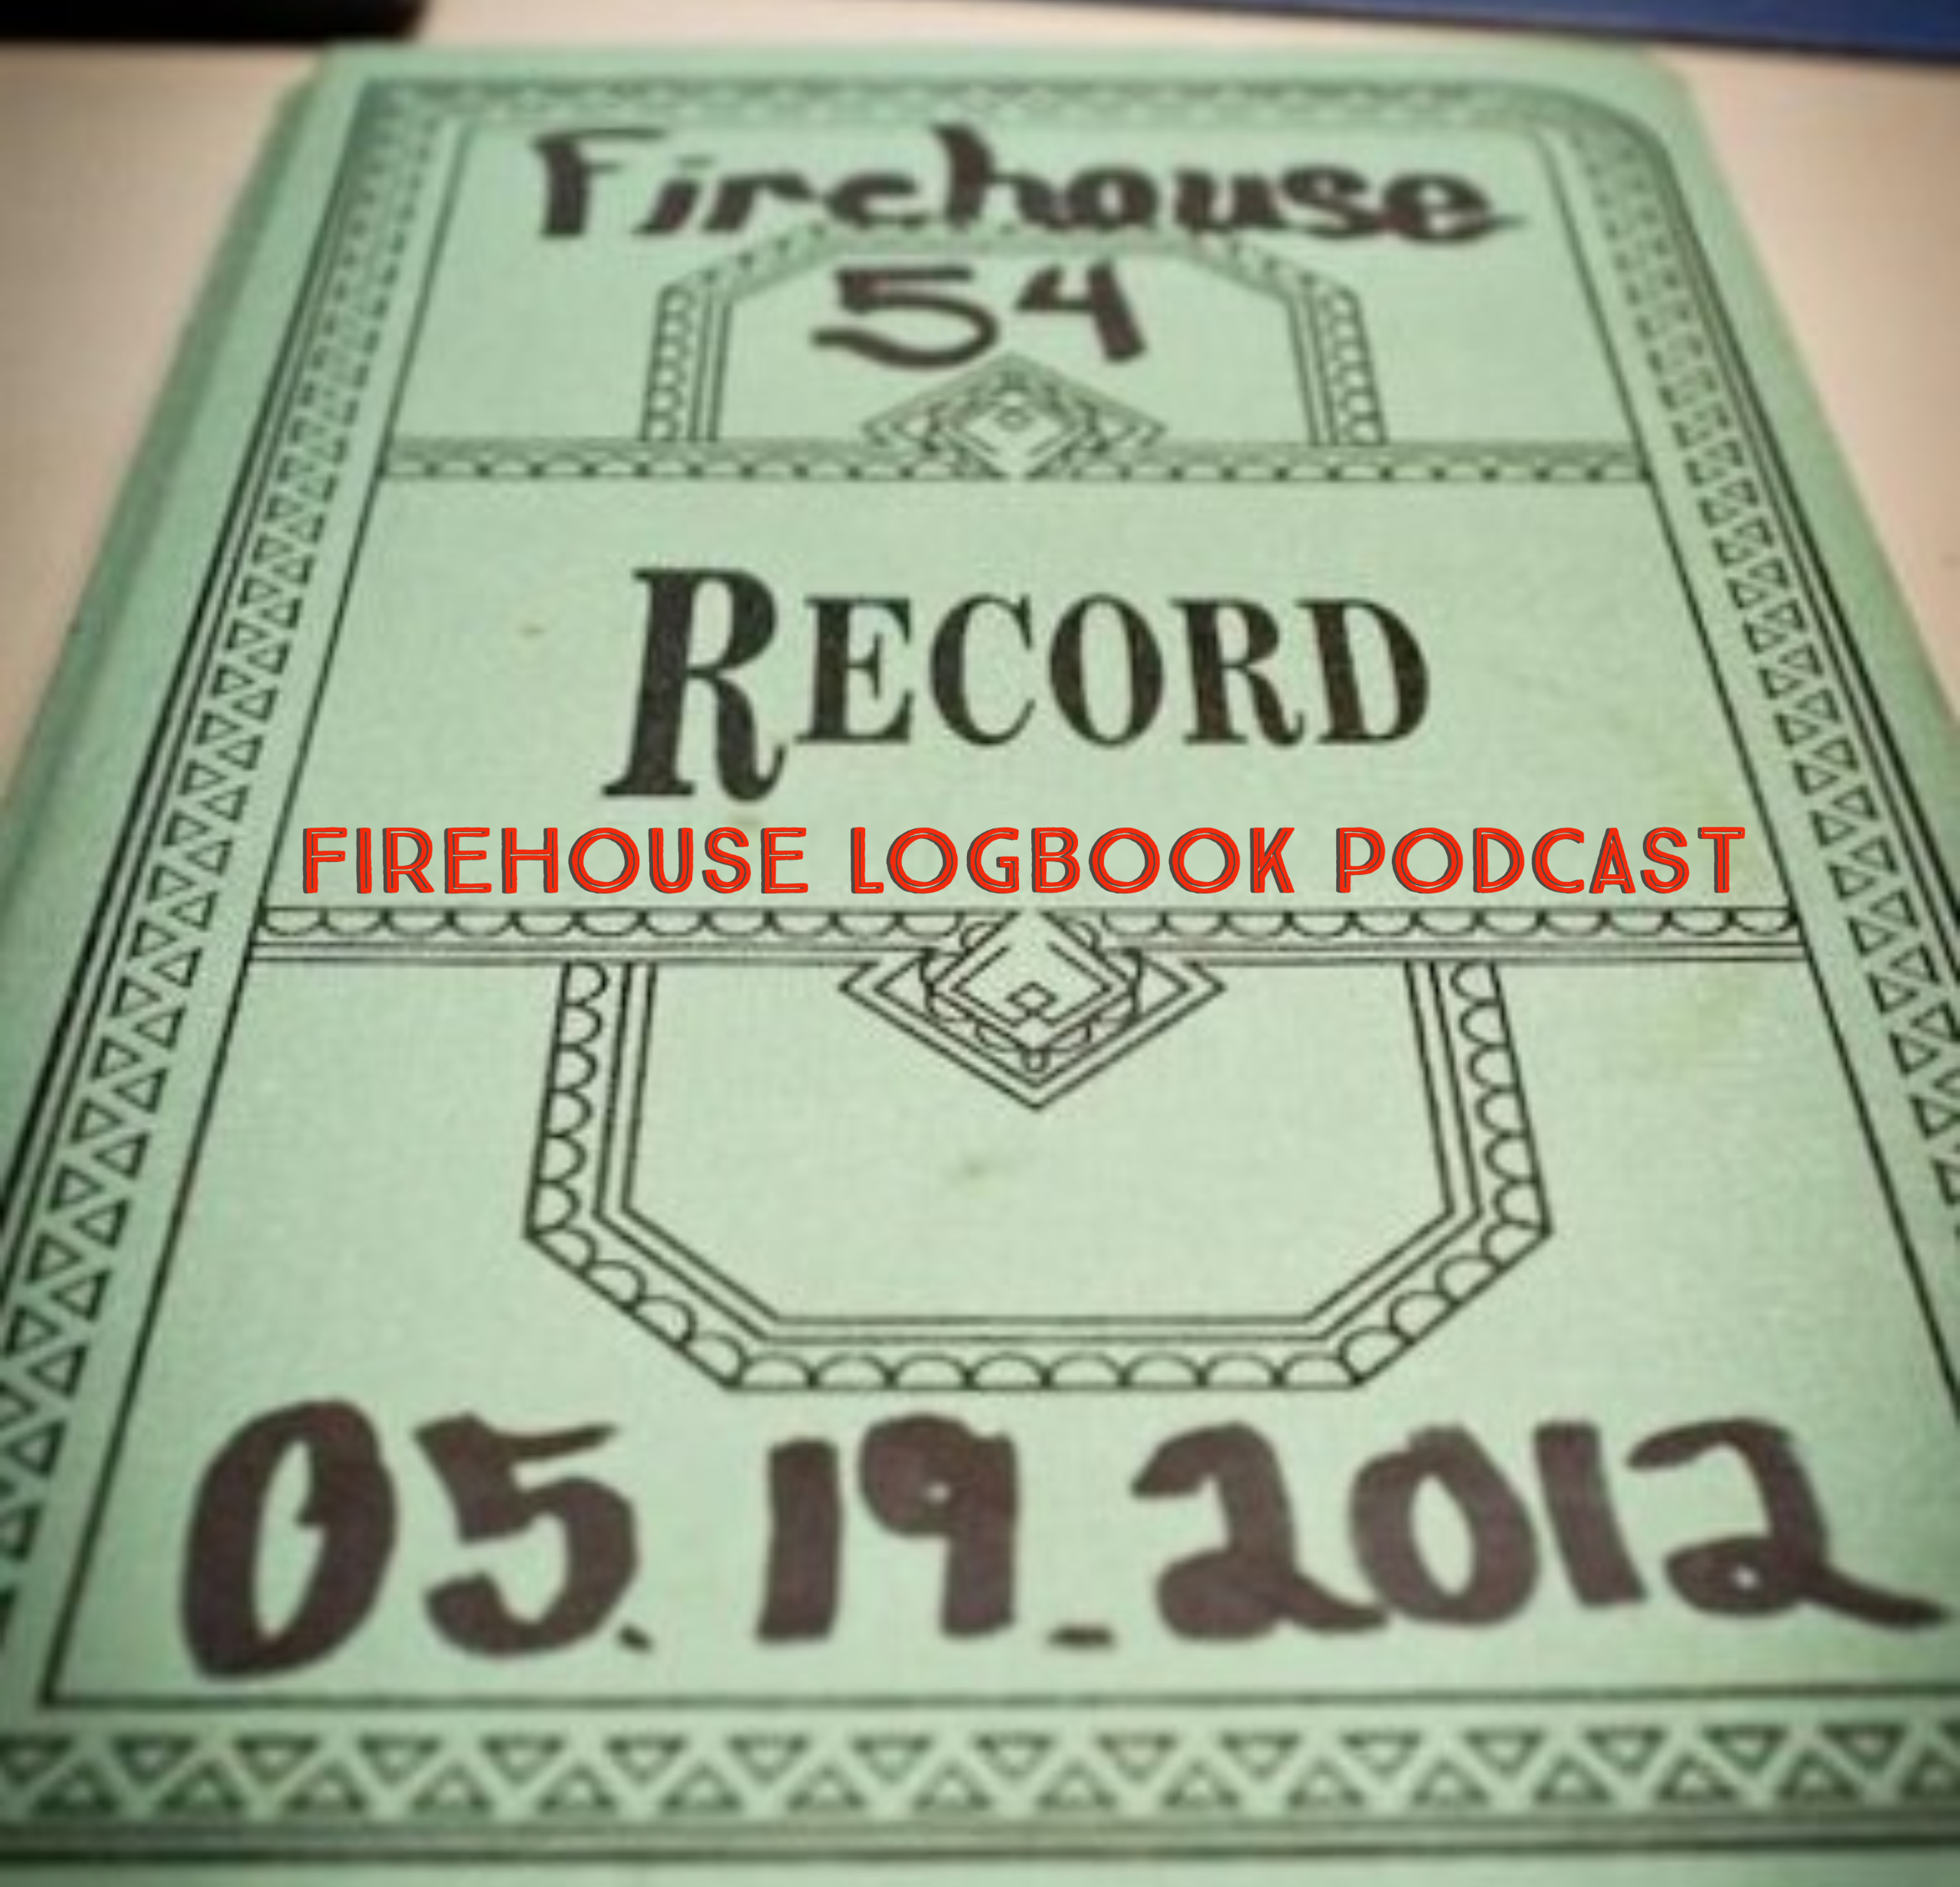 The Firehouse Logbook Podcast